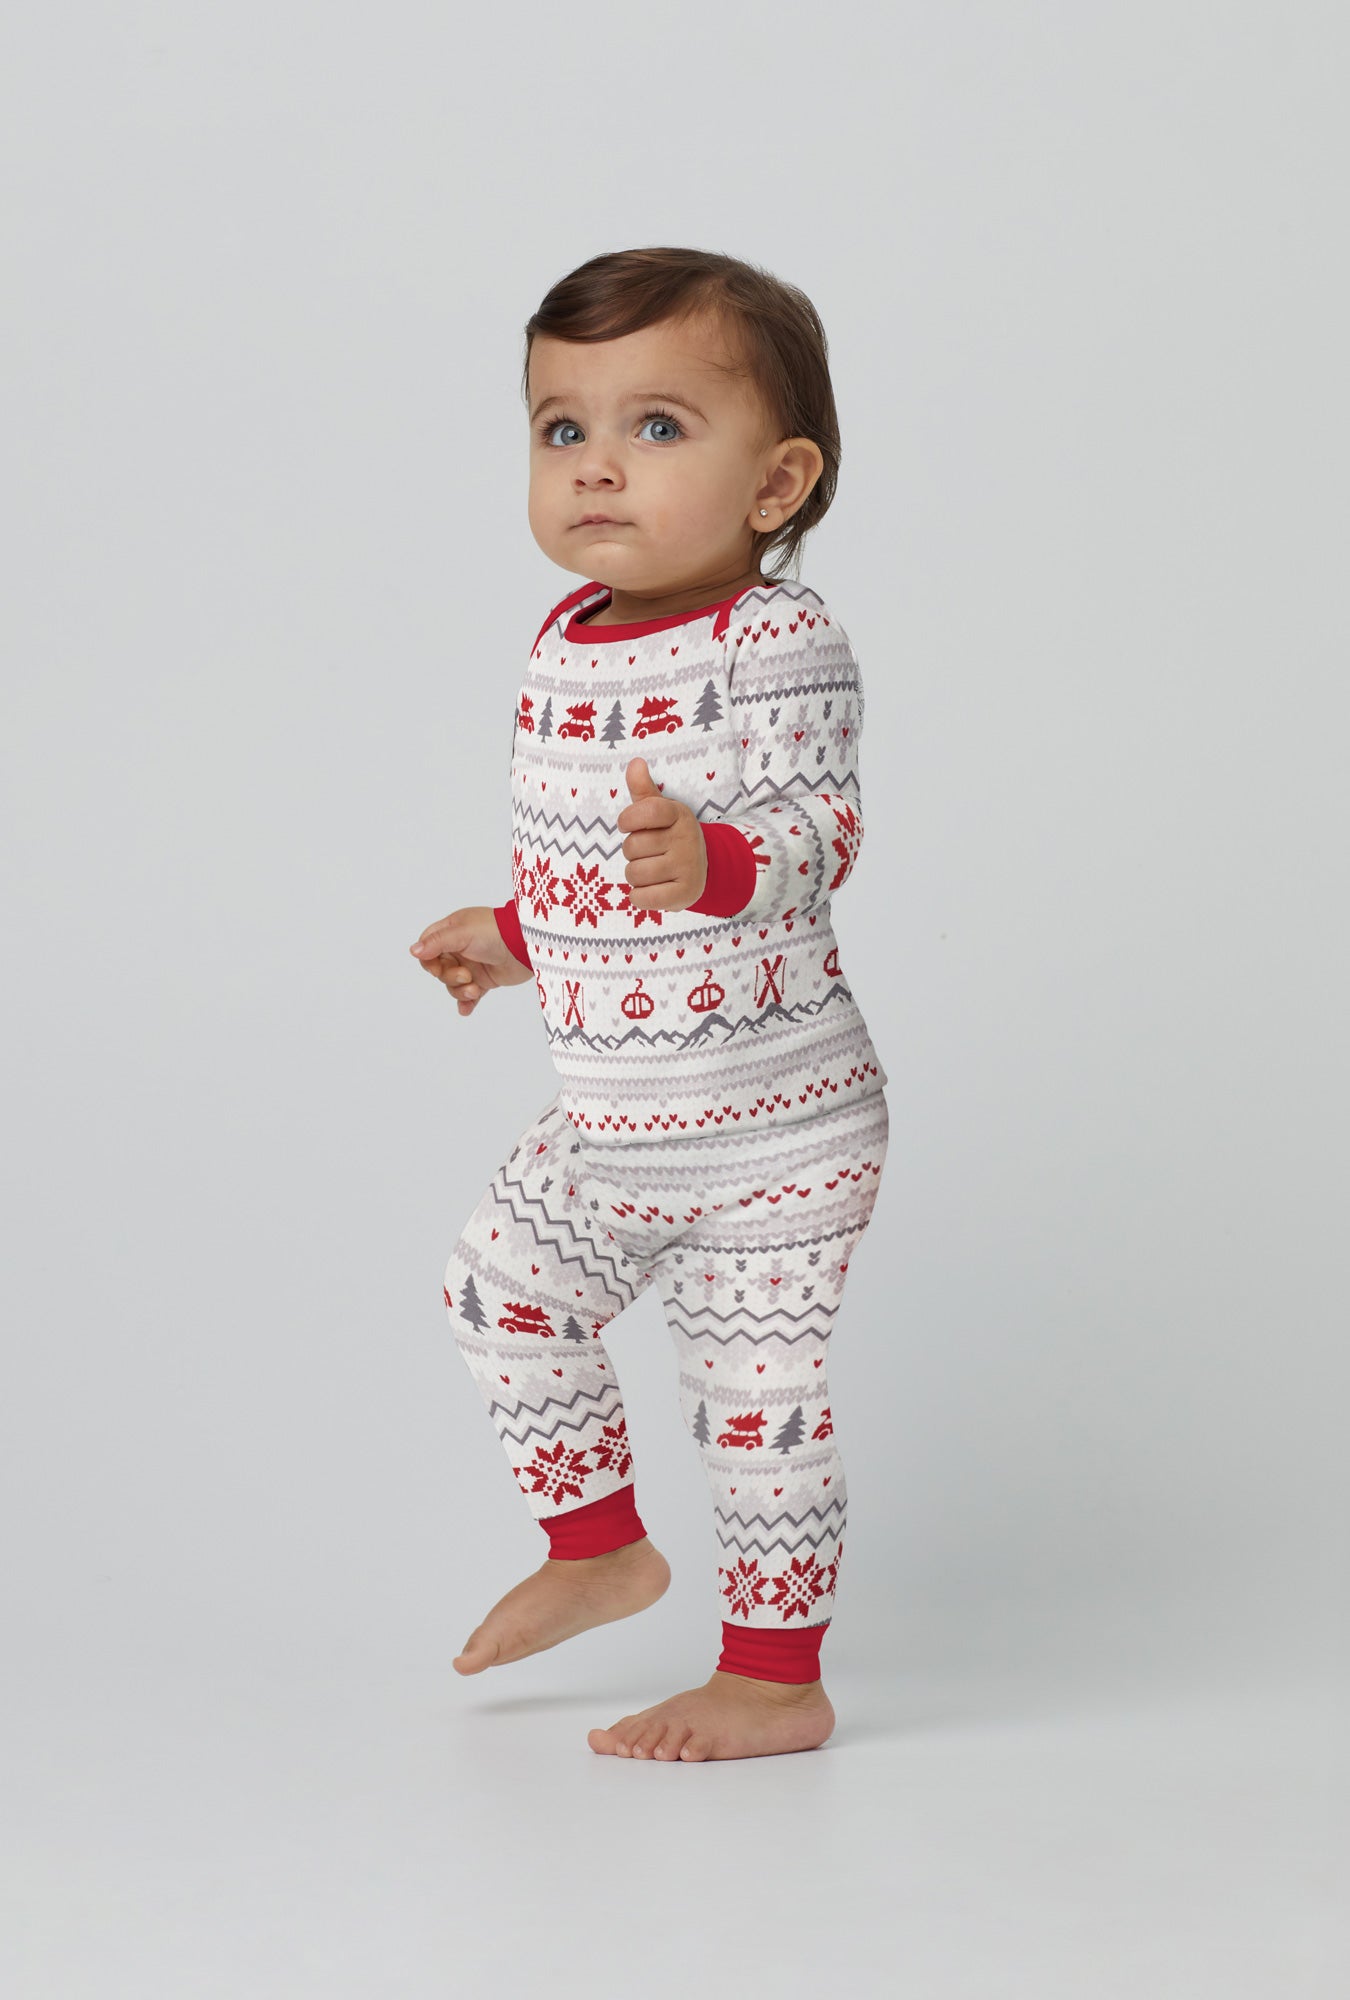 A baby wearing white  Long Sleeve Stretch Jersey Boo Boo PJ Set with Alpine Fair print